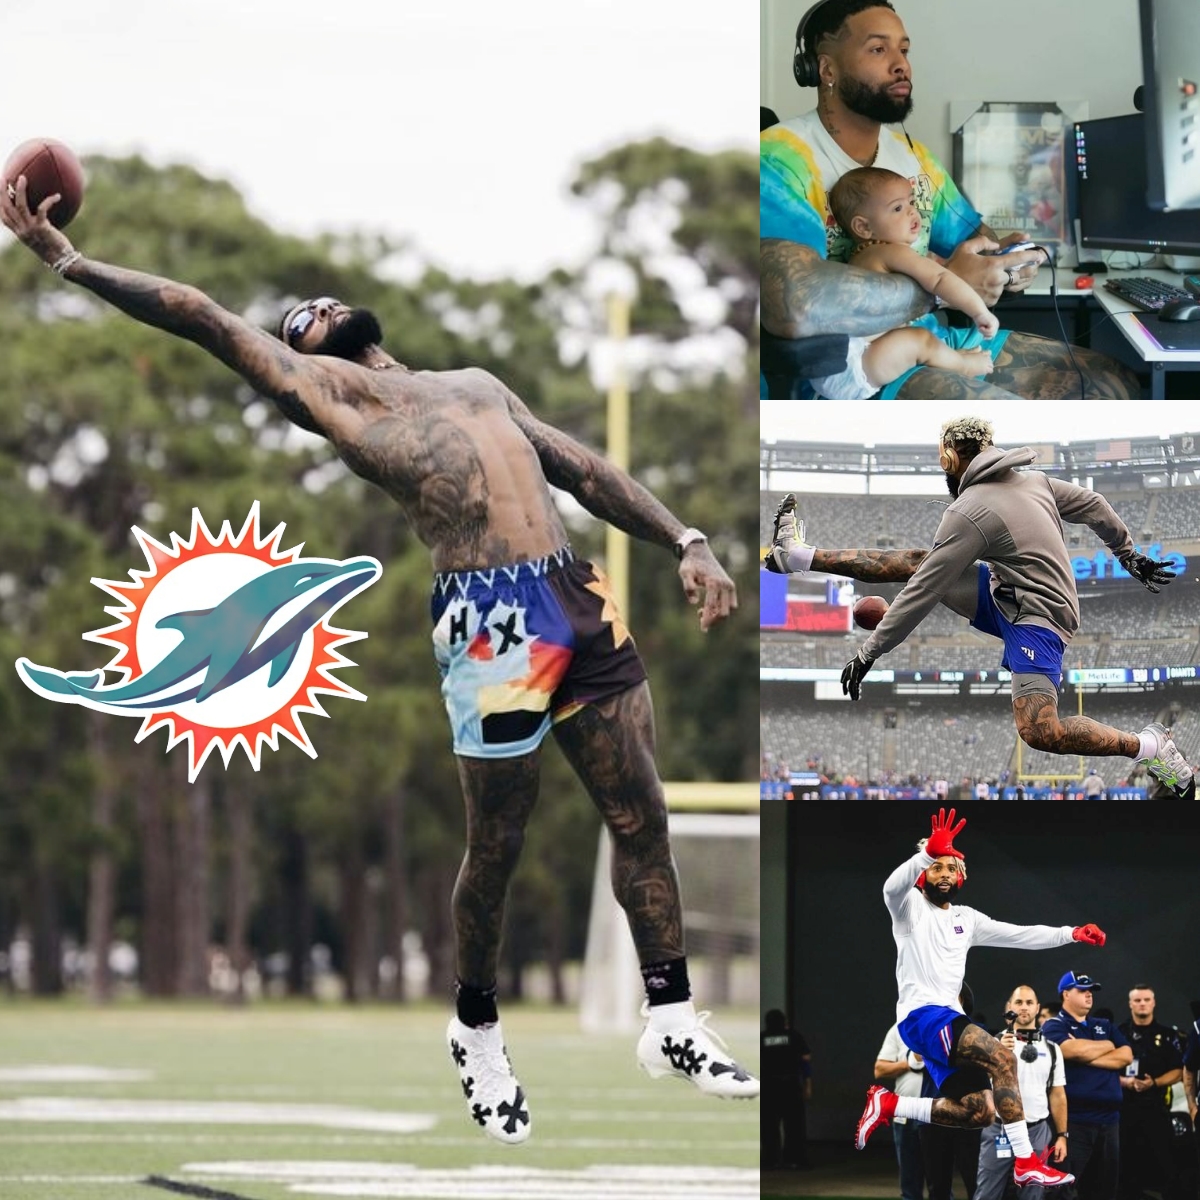 RUMOR MILL: Odell Beckham Jr. May Catch Passes for Dolphins Soon – NEWS